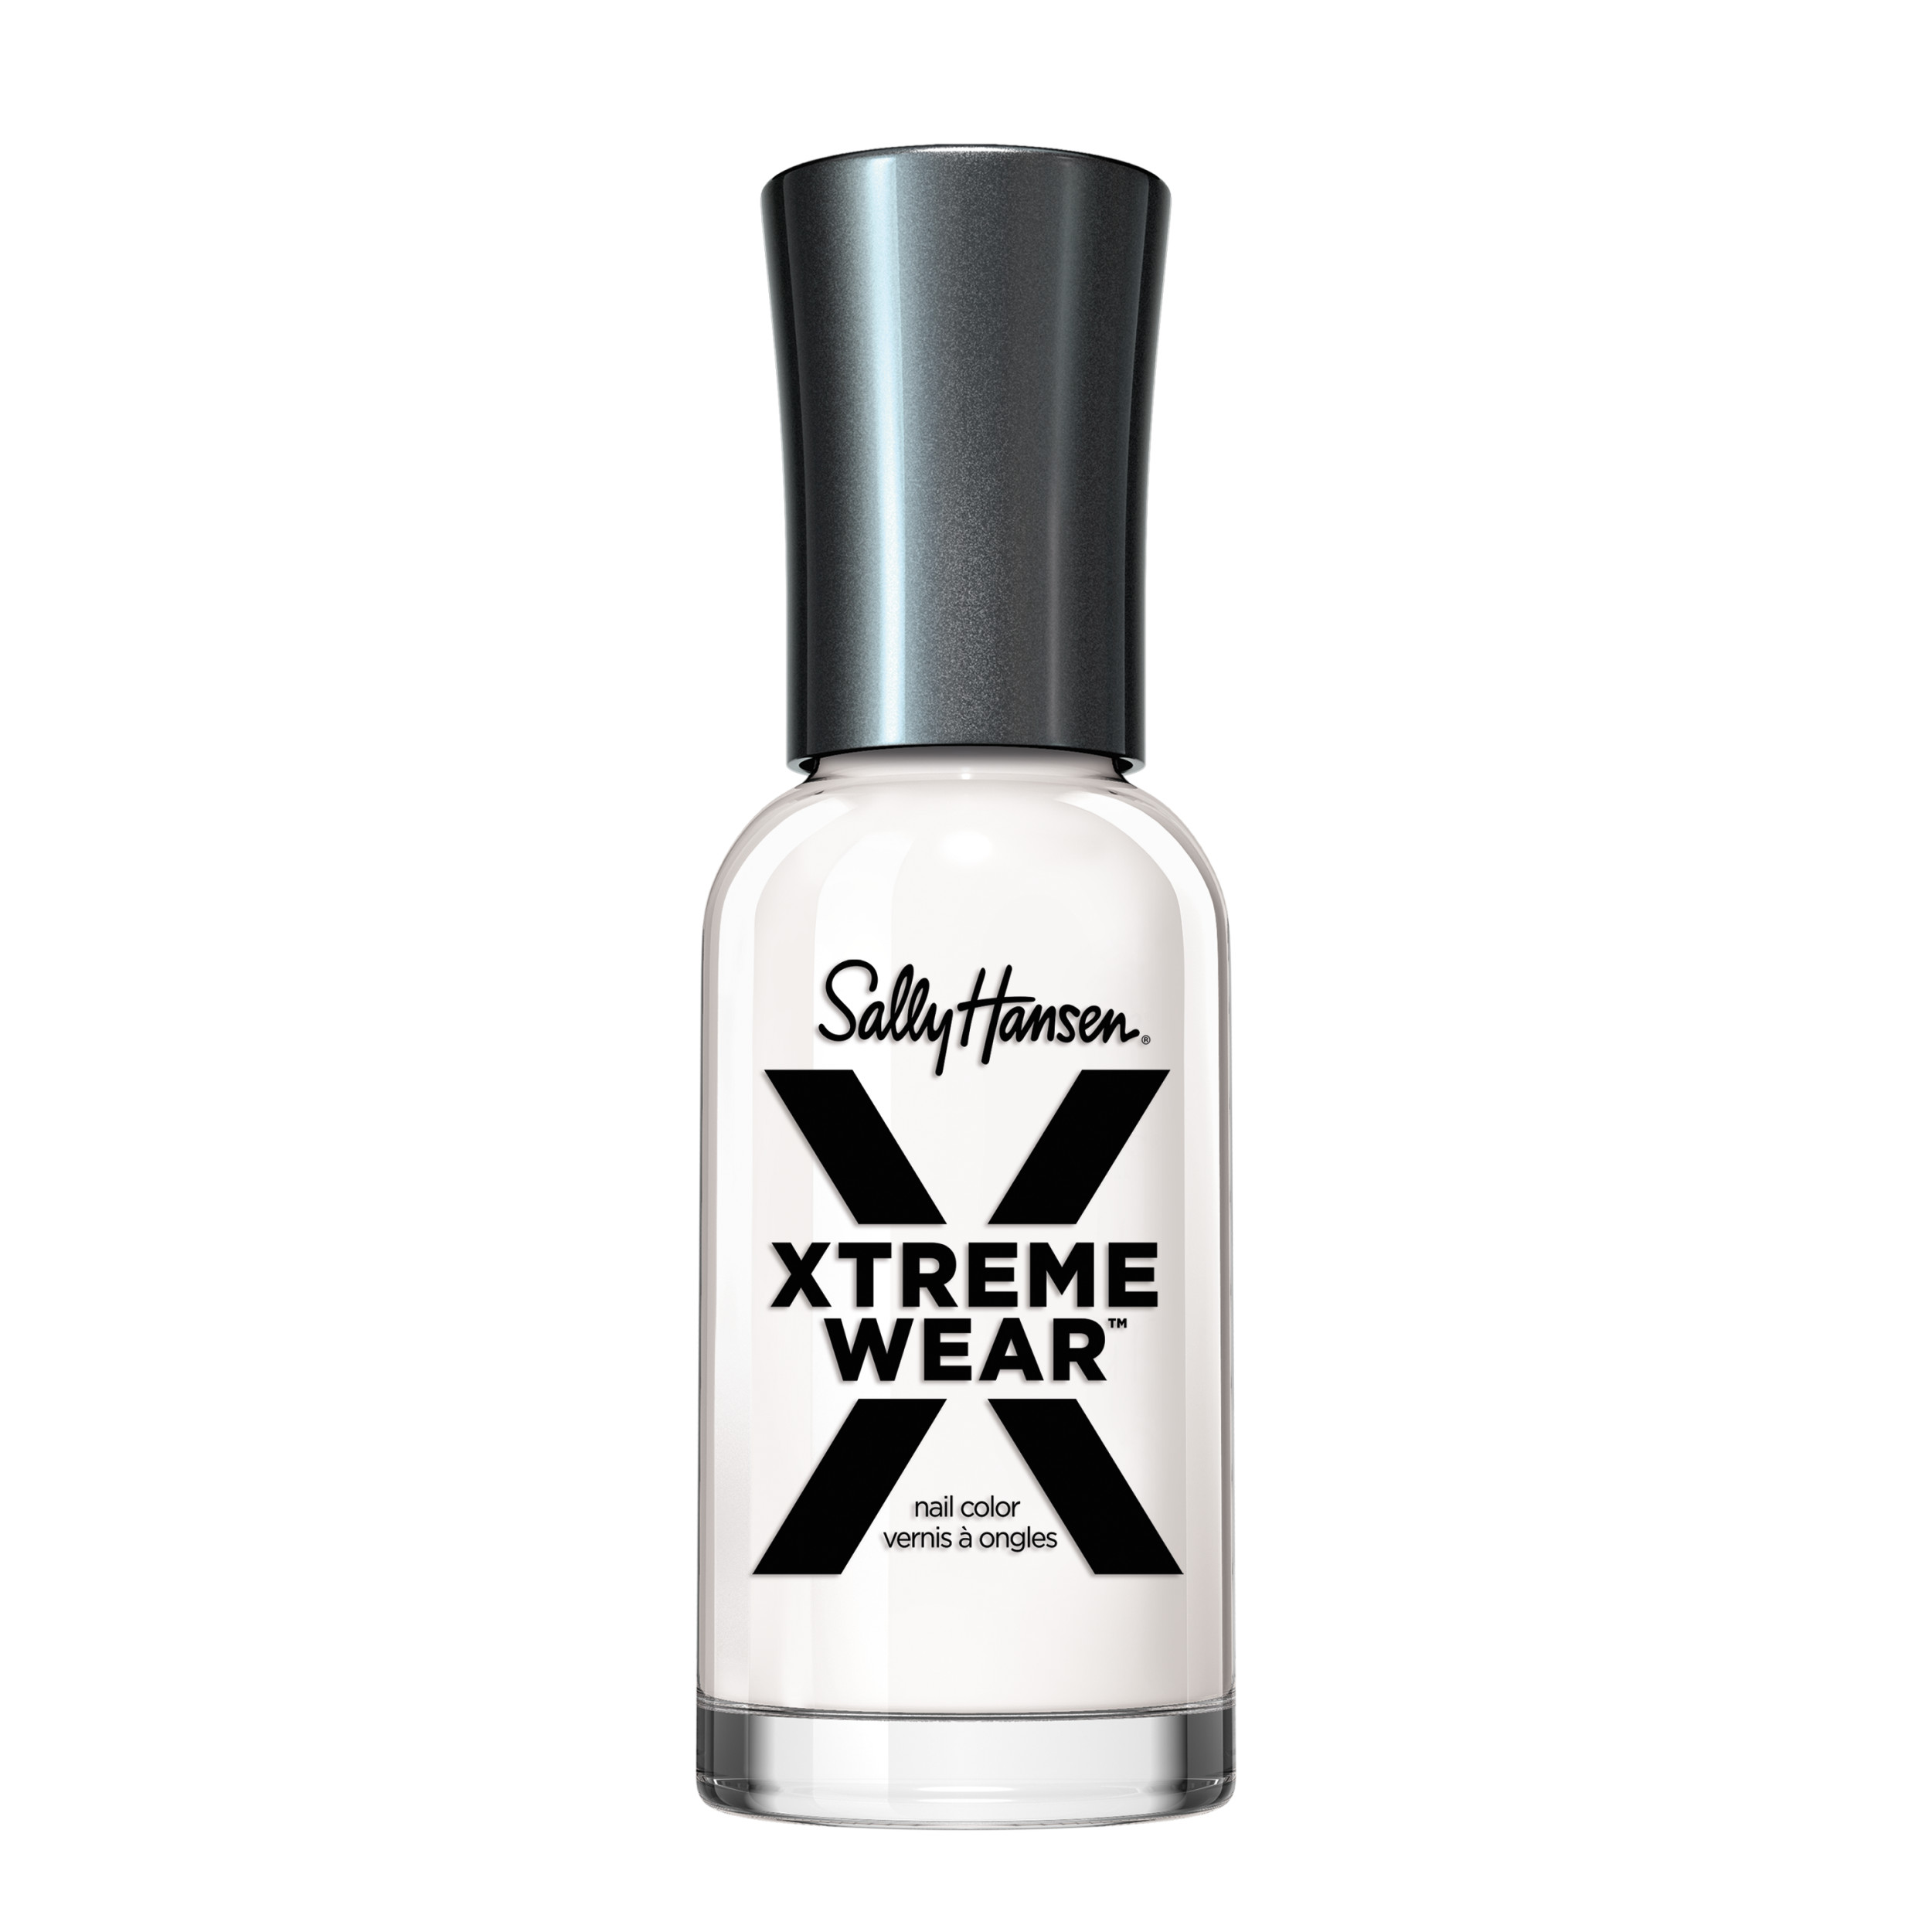 Sally Hansen Xtreme Wear Nail Polish, White On, 0.4 oz, Chip Resistant, Bold Color - image 1 of 14